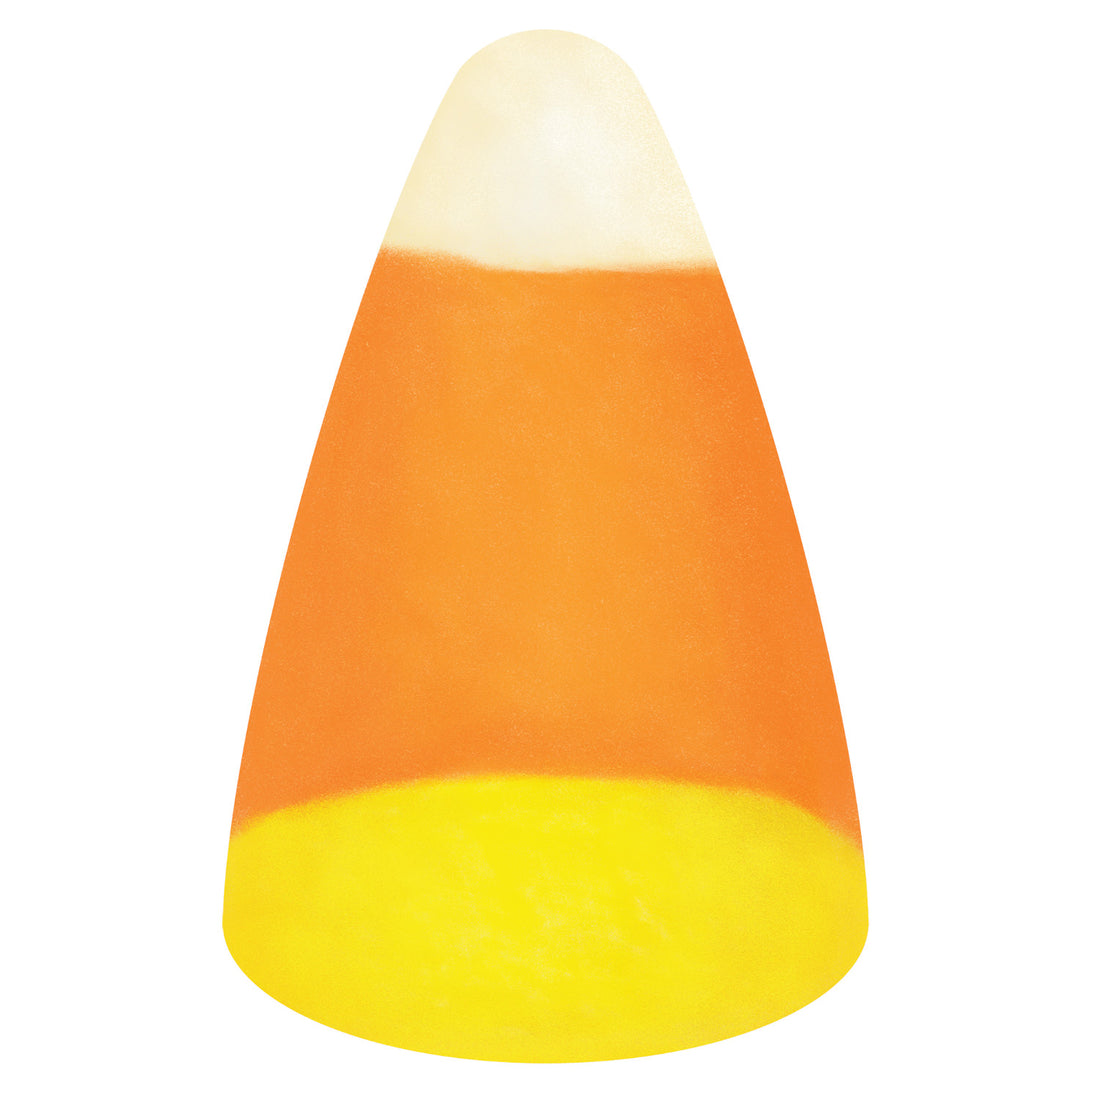 A die-cut illustration of a large piece of candy corn, in the classic orange color with a yellow bottom and white tip.